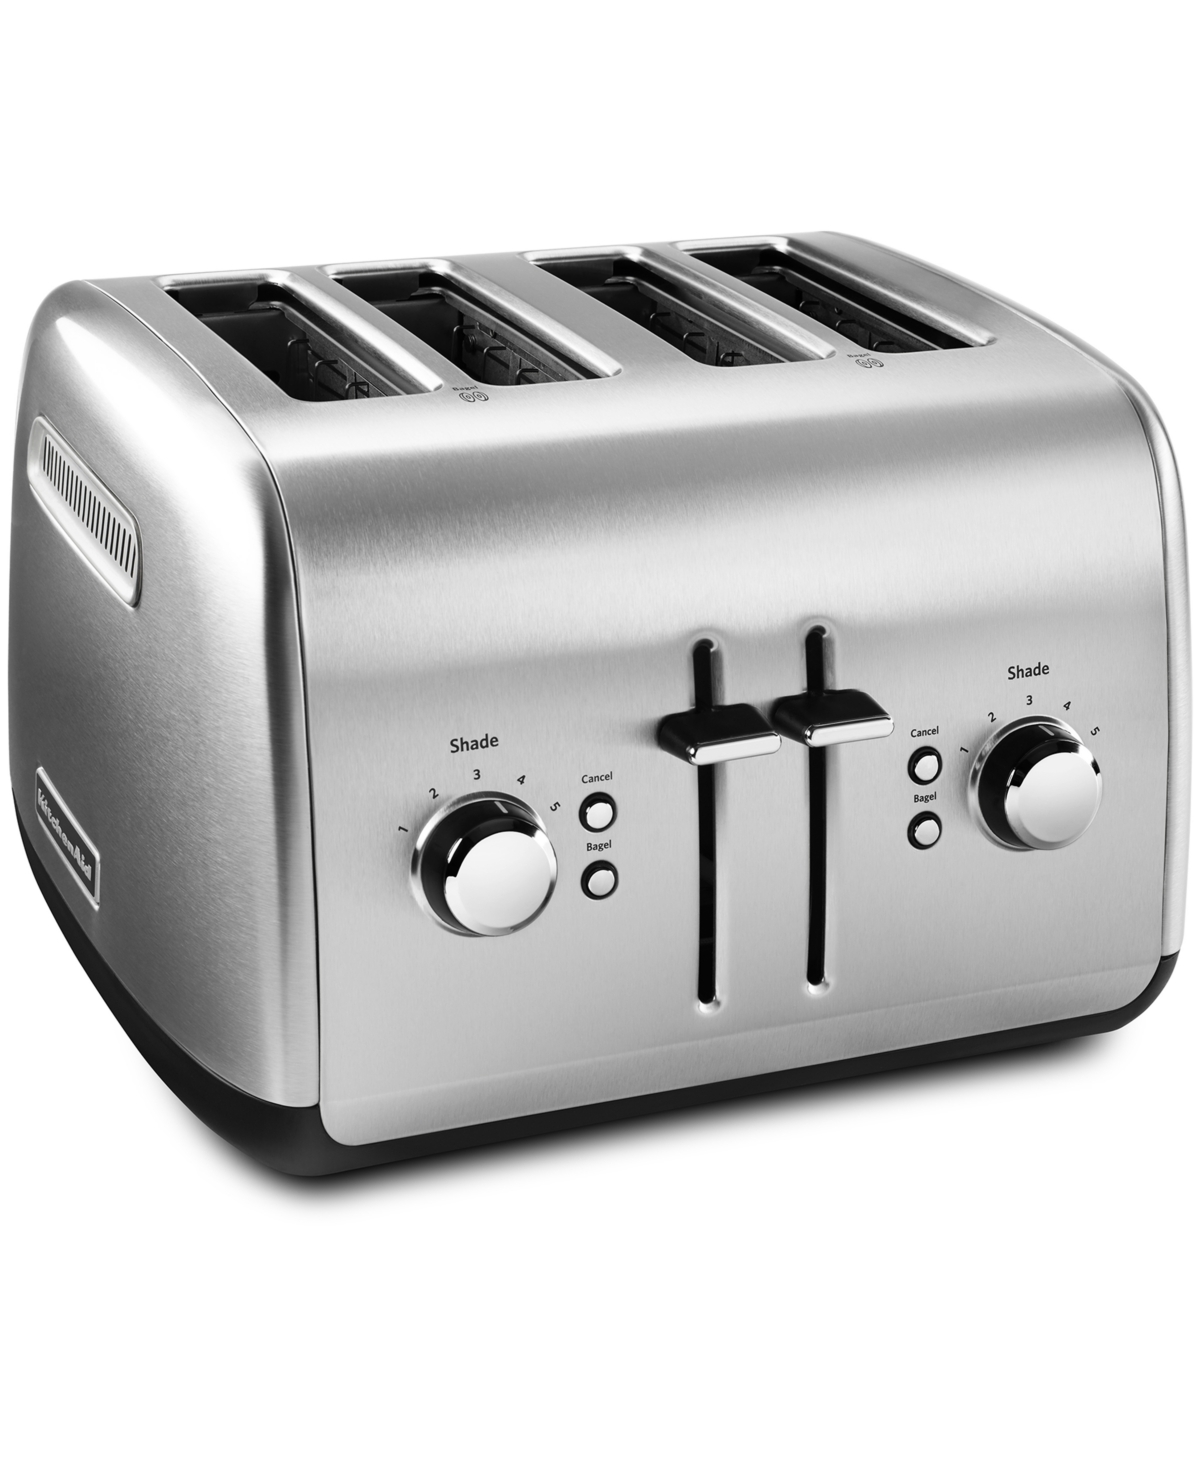 KITCHENAID KMT4115 4-SLICE TOASTER WITH MANUAL HIGH-LIFT LEVER